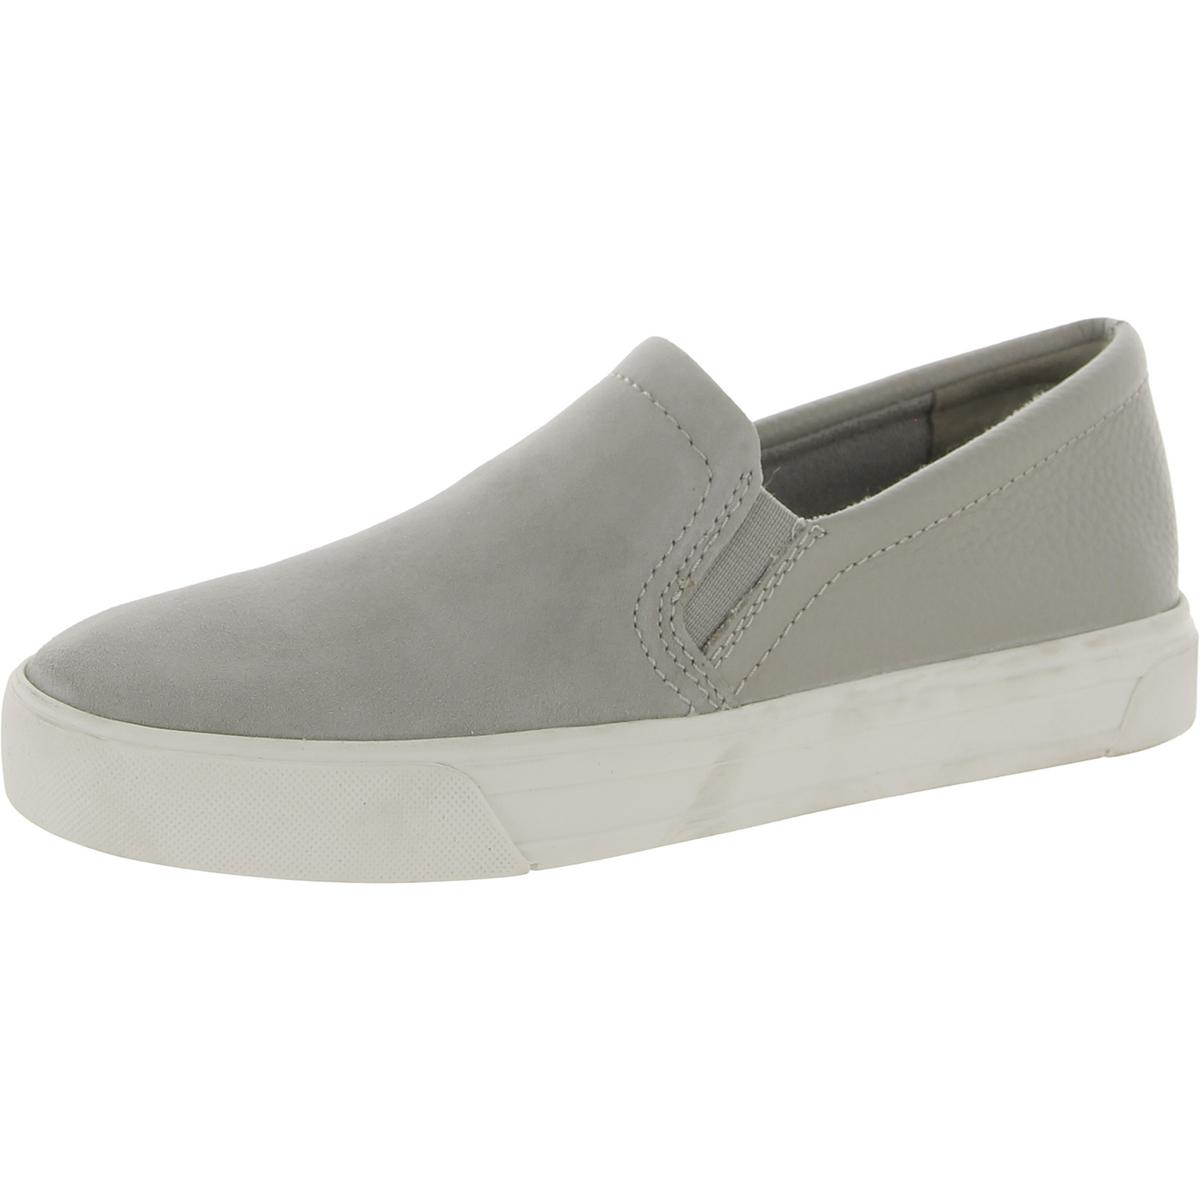 Naturalizer Aileen Womens Slip-On Sneakers